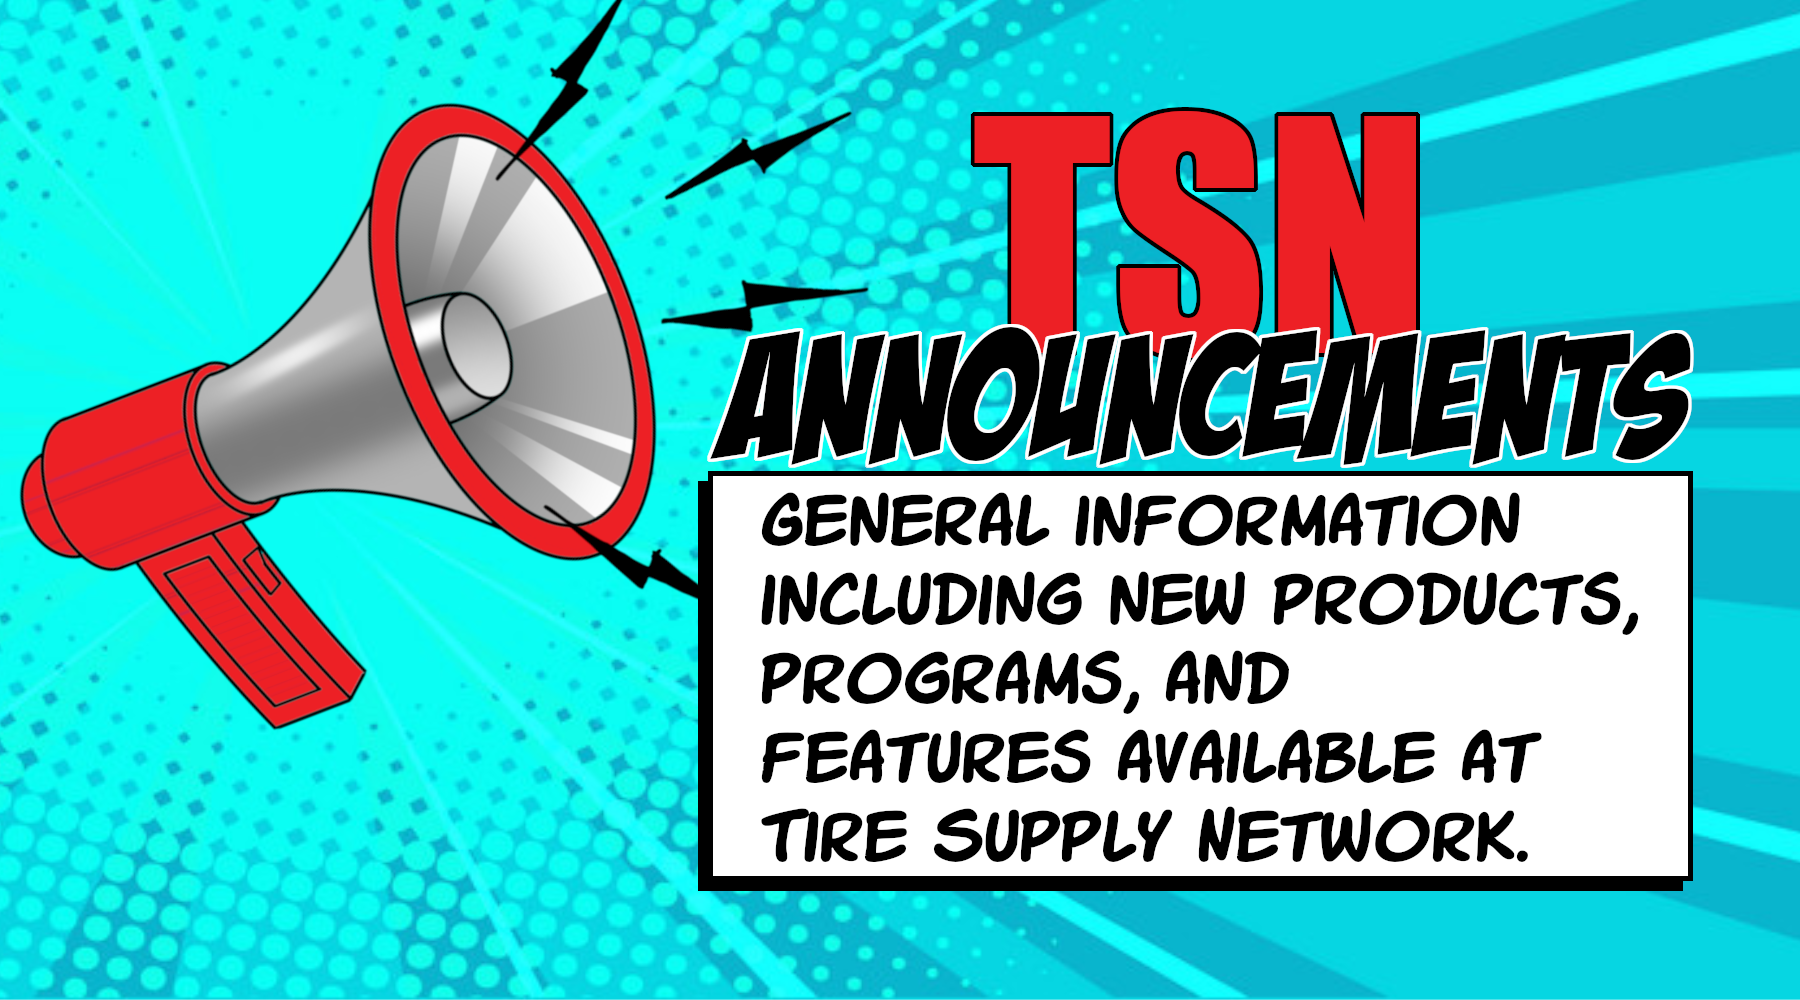 TSN-announcements-information-new-products-programs-features-tire-supplies-tire-repair-tire-supplier-valve-stems-wheel-weights-tire-patches